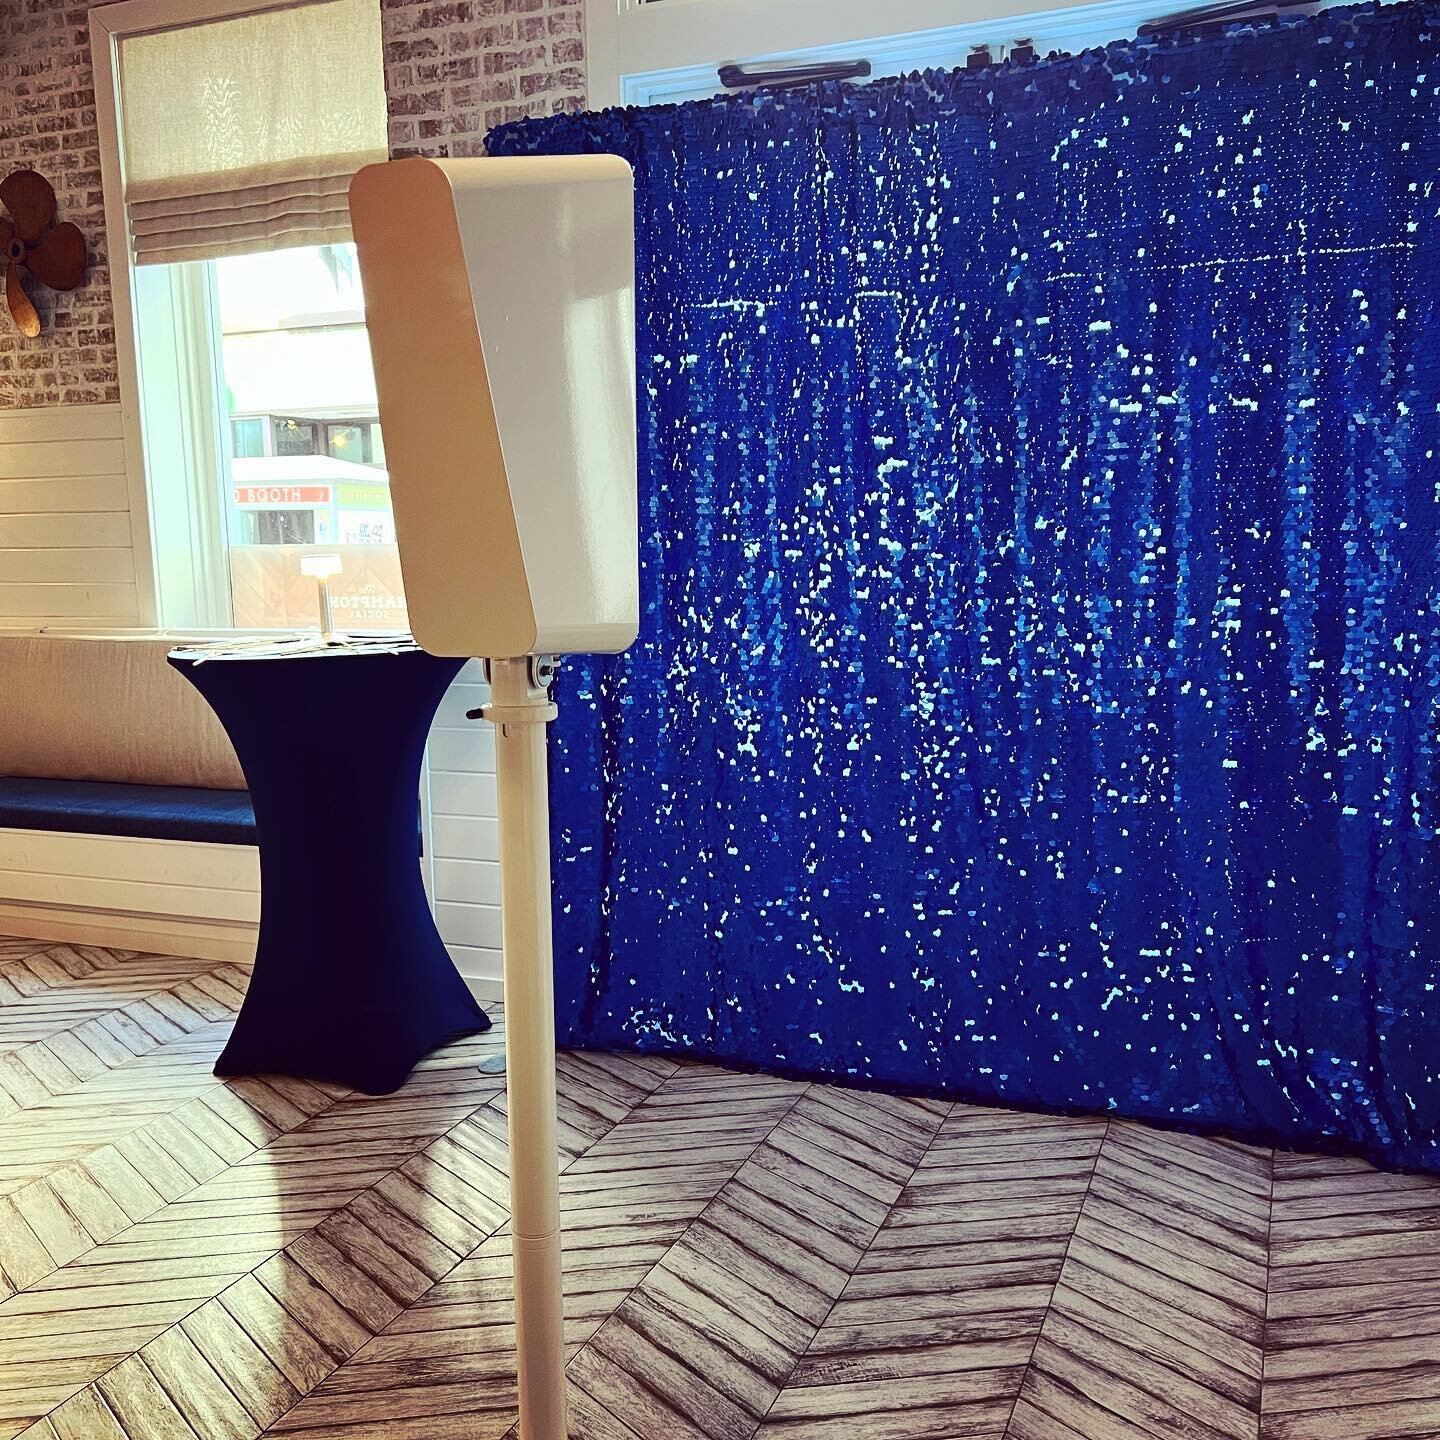 Have booth&hellip; will travel! We have a new digital delivery photo booth offering DSLR quality pics and gifs to your guests. Here is the sleek set up at an event we did on Monday in Orlando along with a sample of the gif file guests received after 